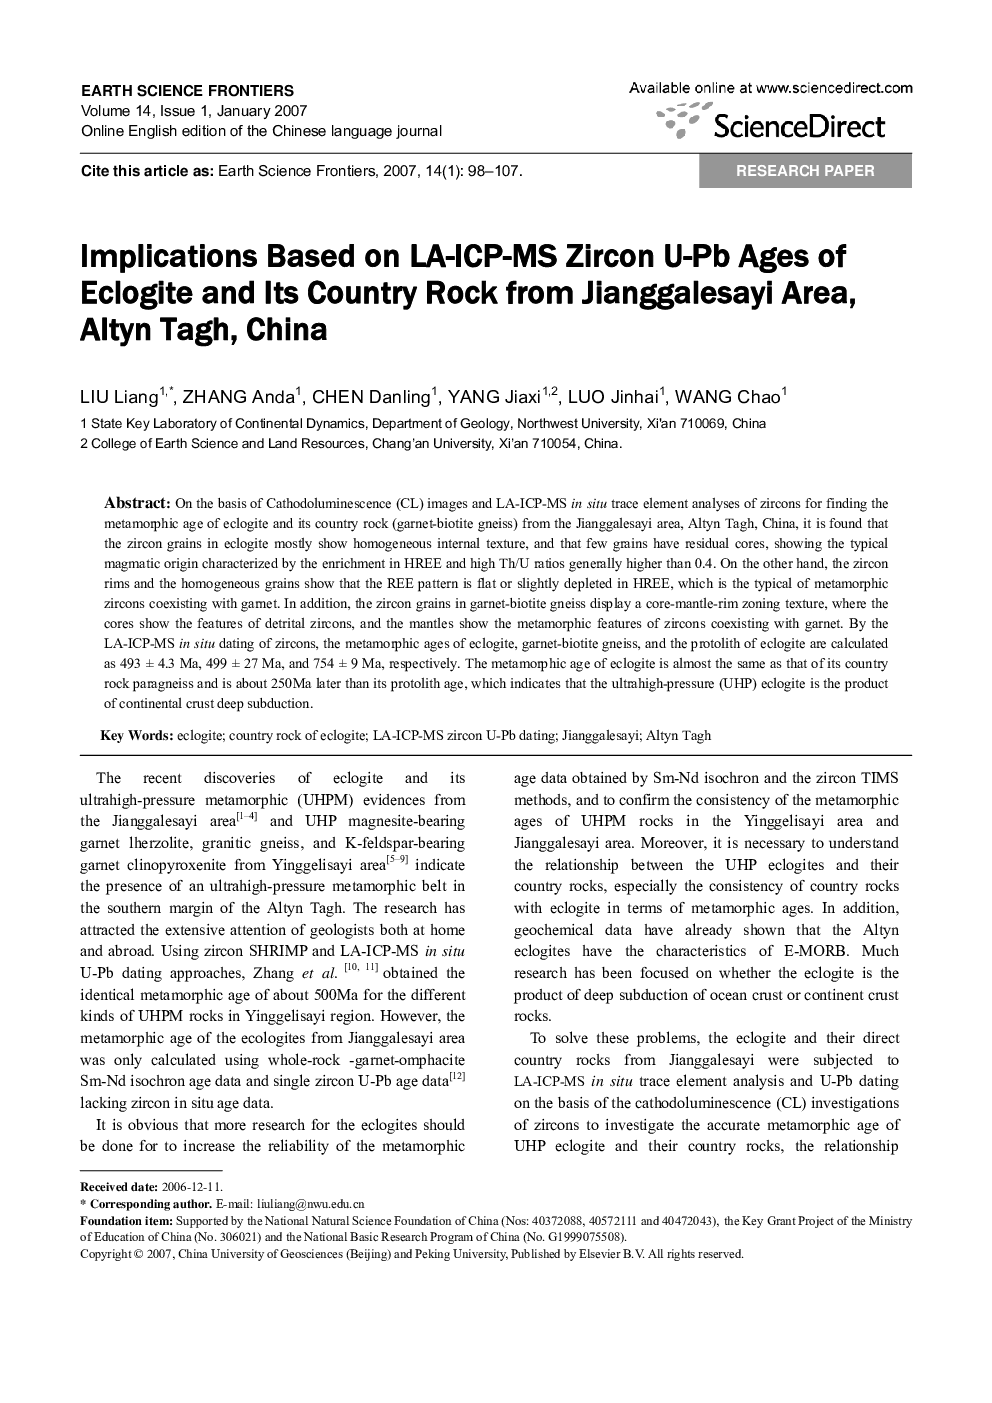 Implications Based on LA-ICP-MS Zircon U-Pb Ages of Eclogite and Its Country Rock from Jianggalesayi Area, Altyn Tagh, China 